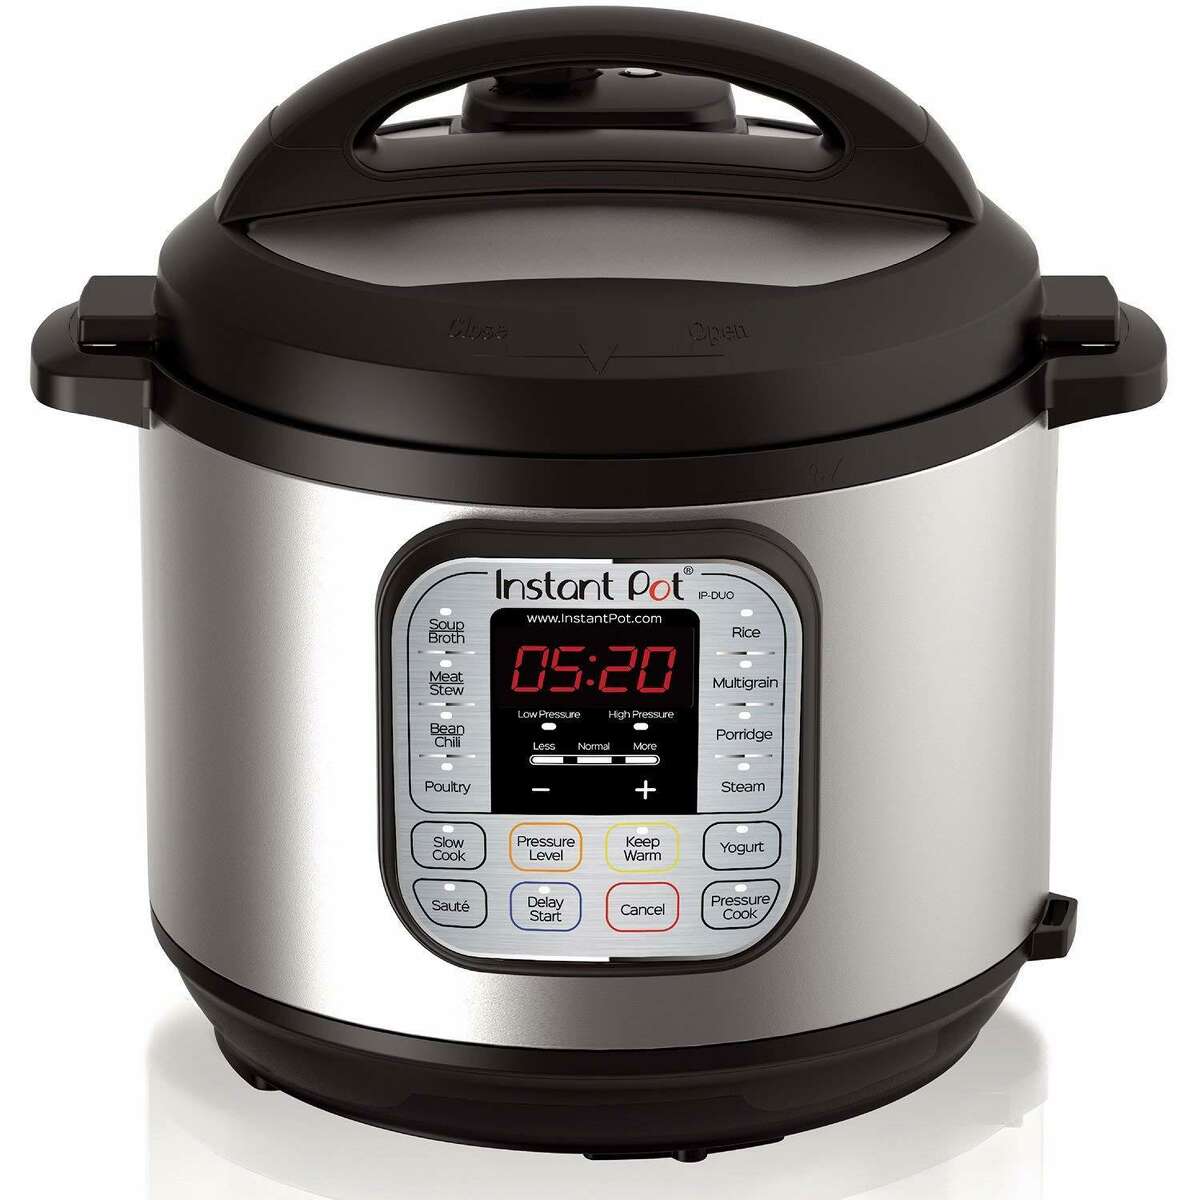 The Instant Pot multicooker is perfect for stews and simmering beans.